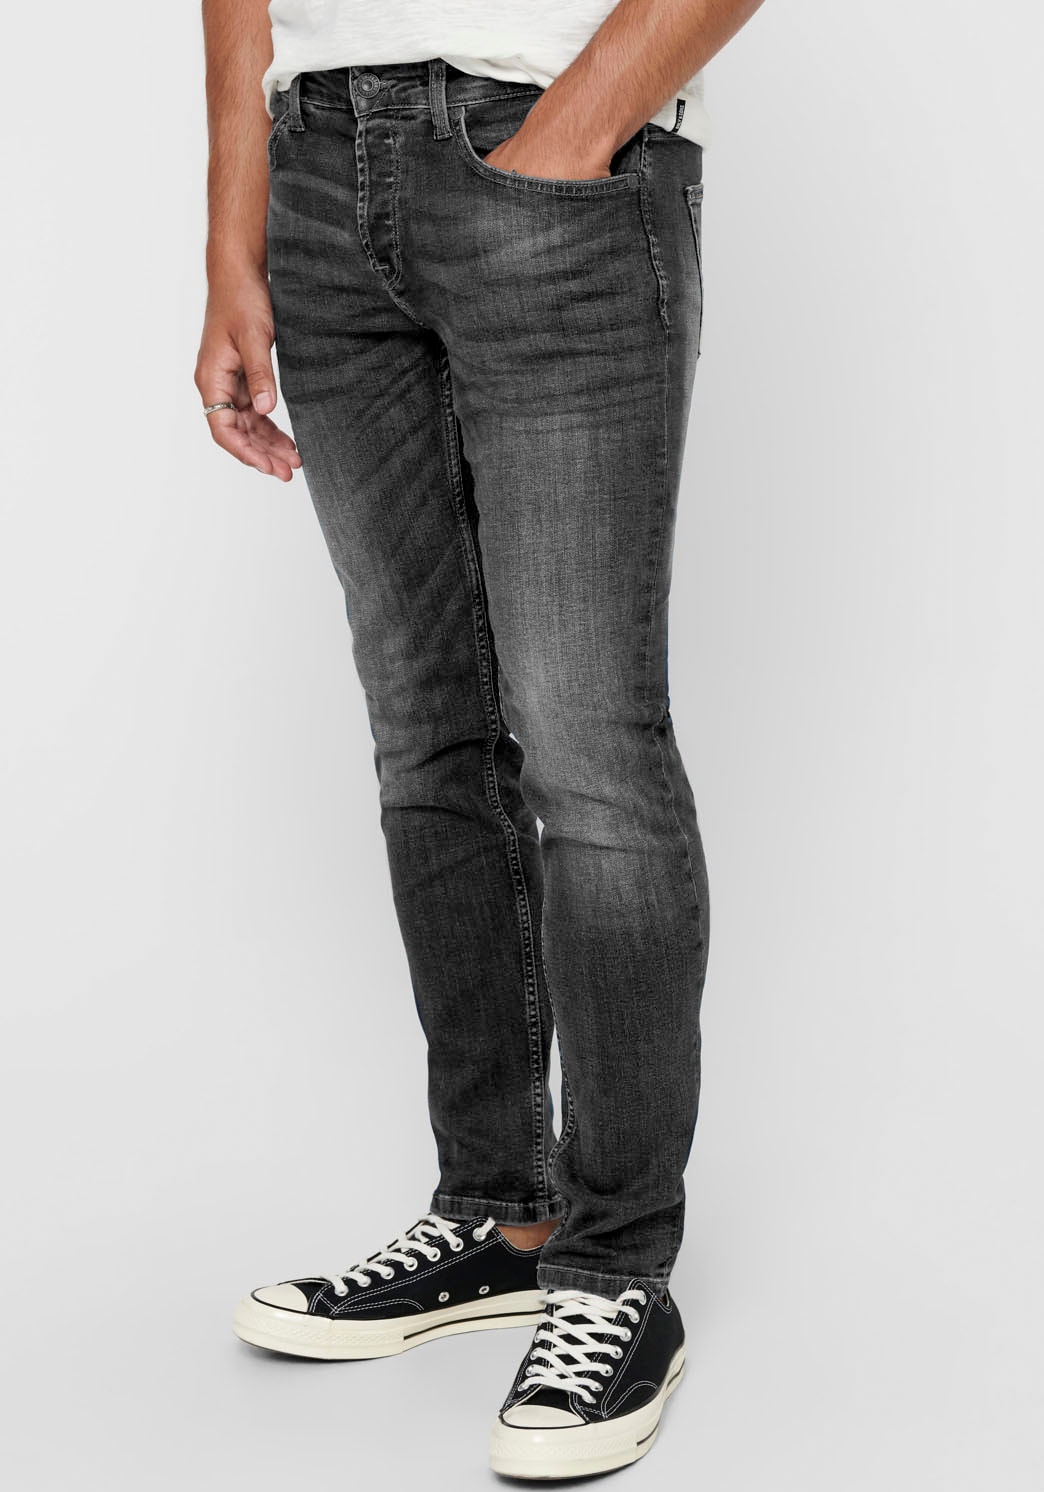 ONLY & SONS Slim-fit-Jeans »ONSWEFT REG. D. GREY 6458 JEANS VD« von ONLY & SONS